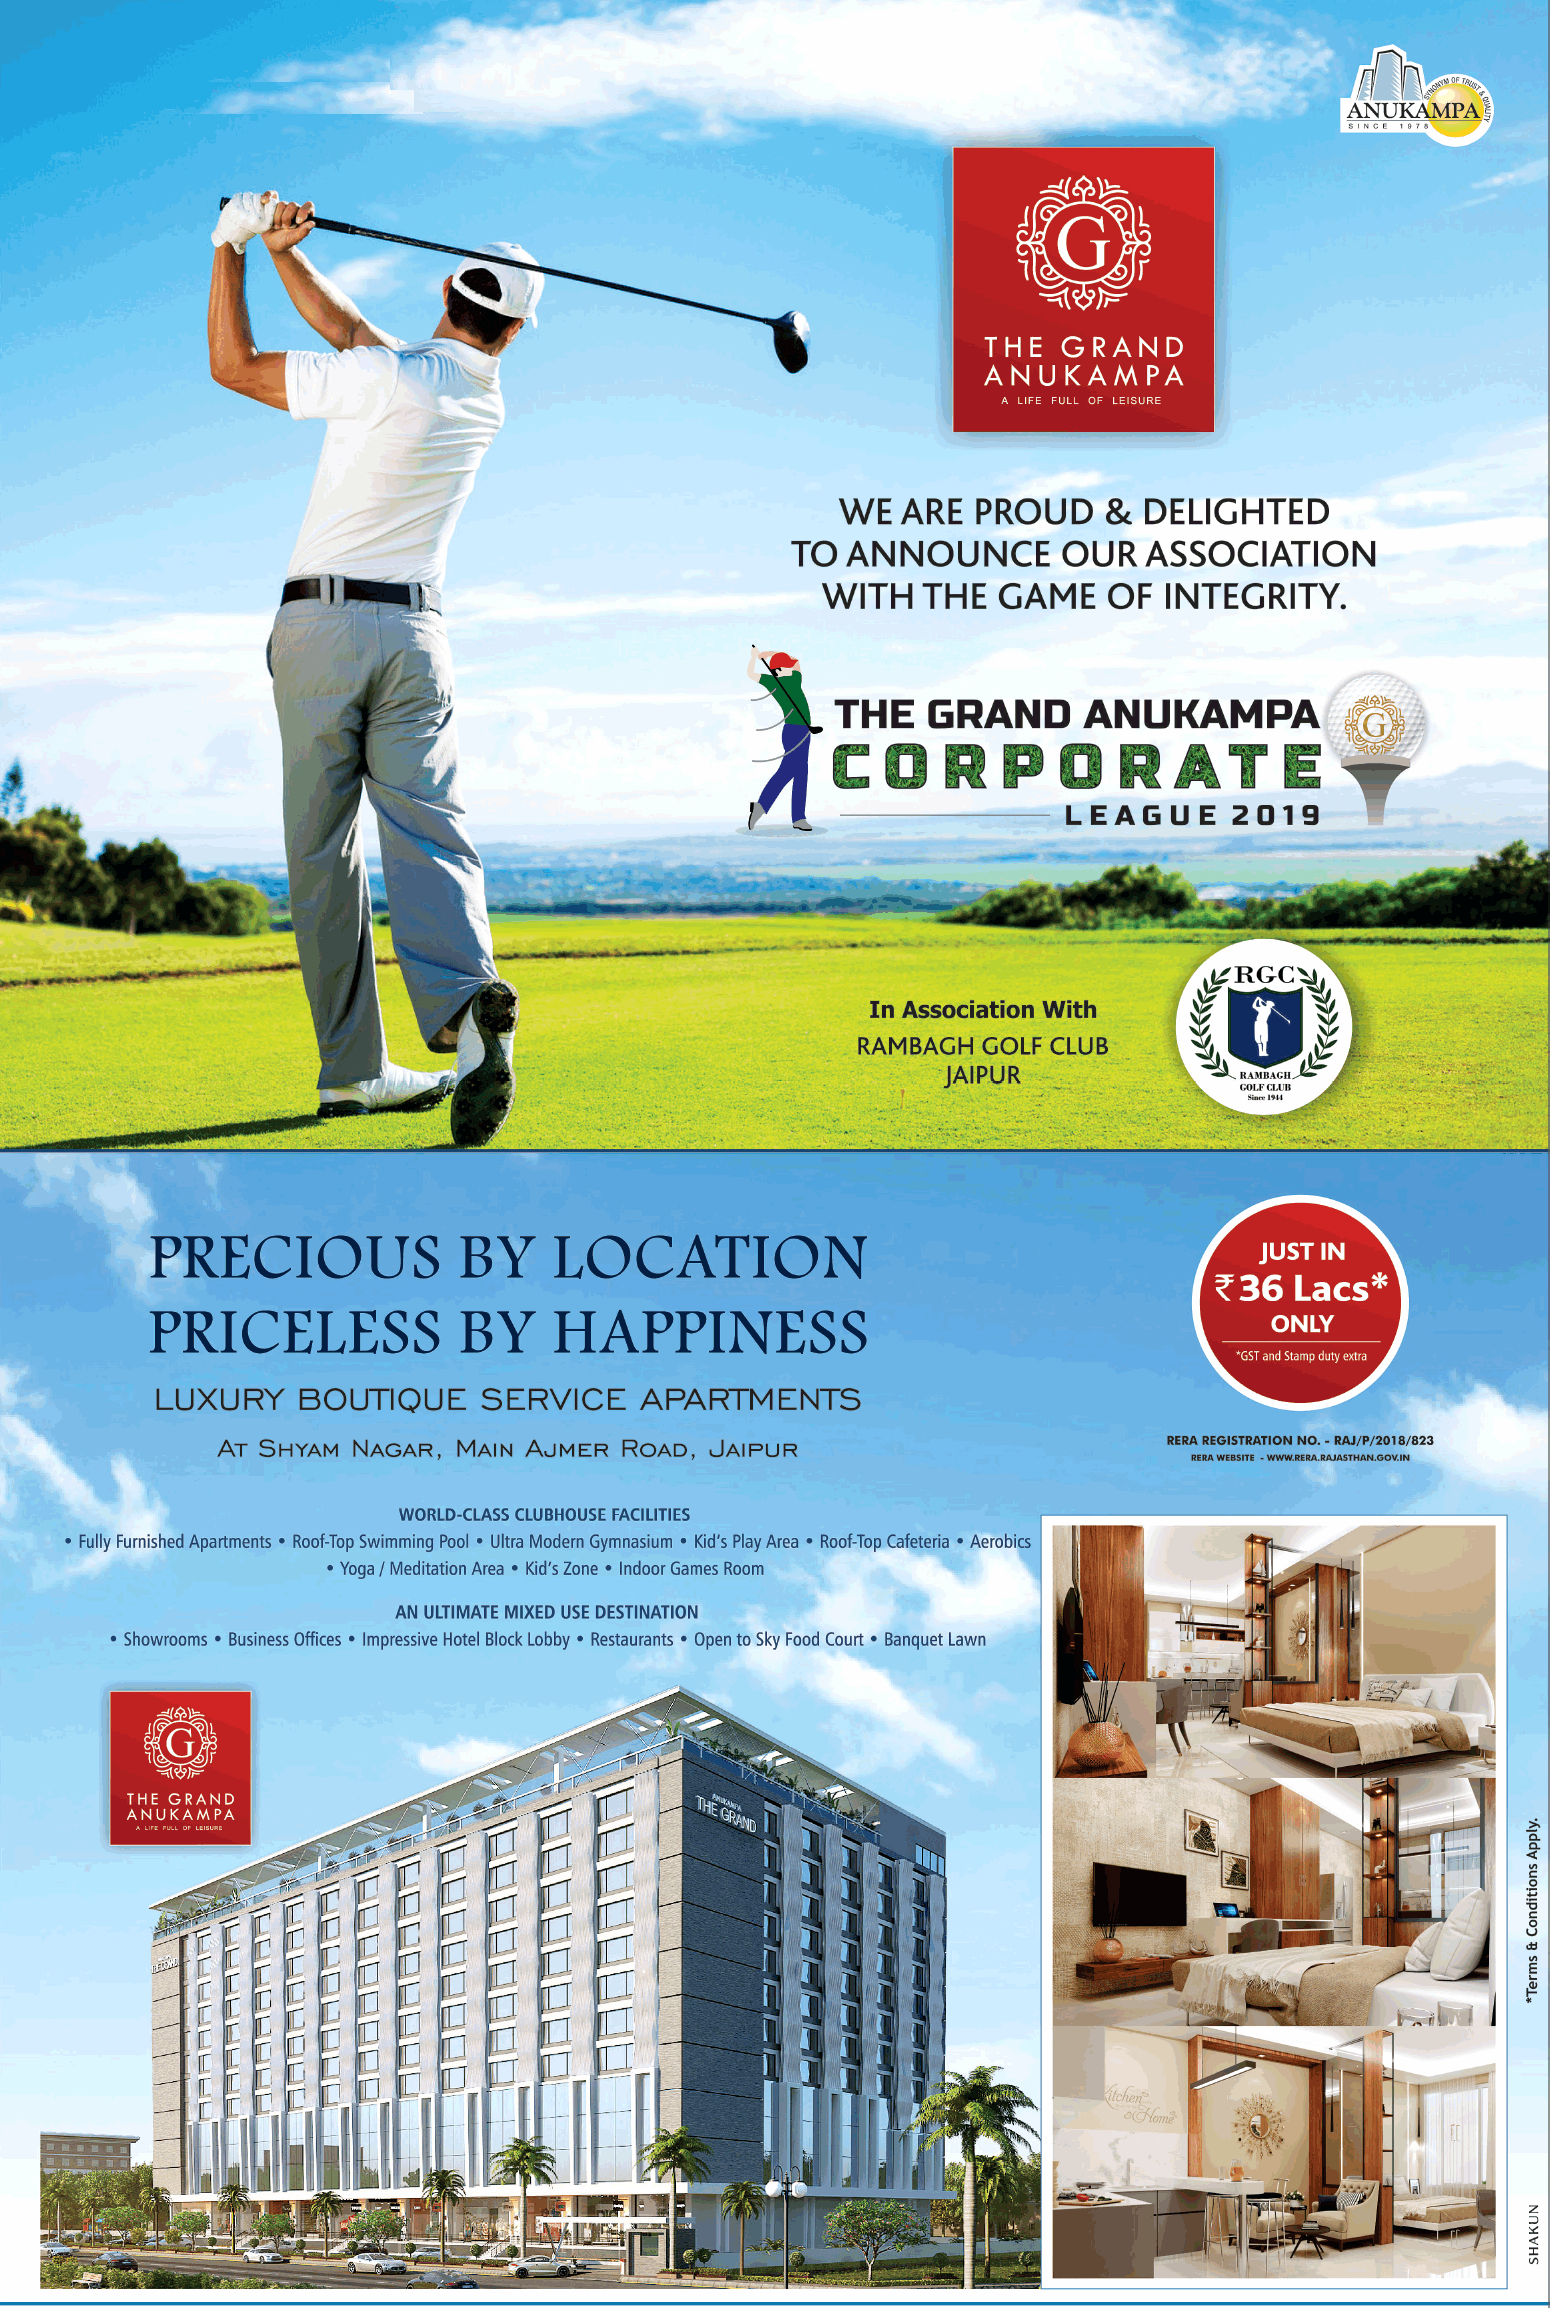 Avail luxury boutique service apartments just in Rs. 36 lakhs at The Grand Anukampa in Jaipur